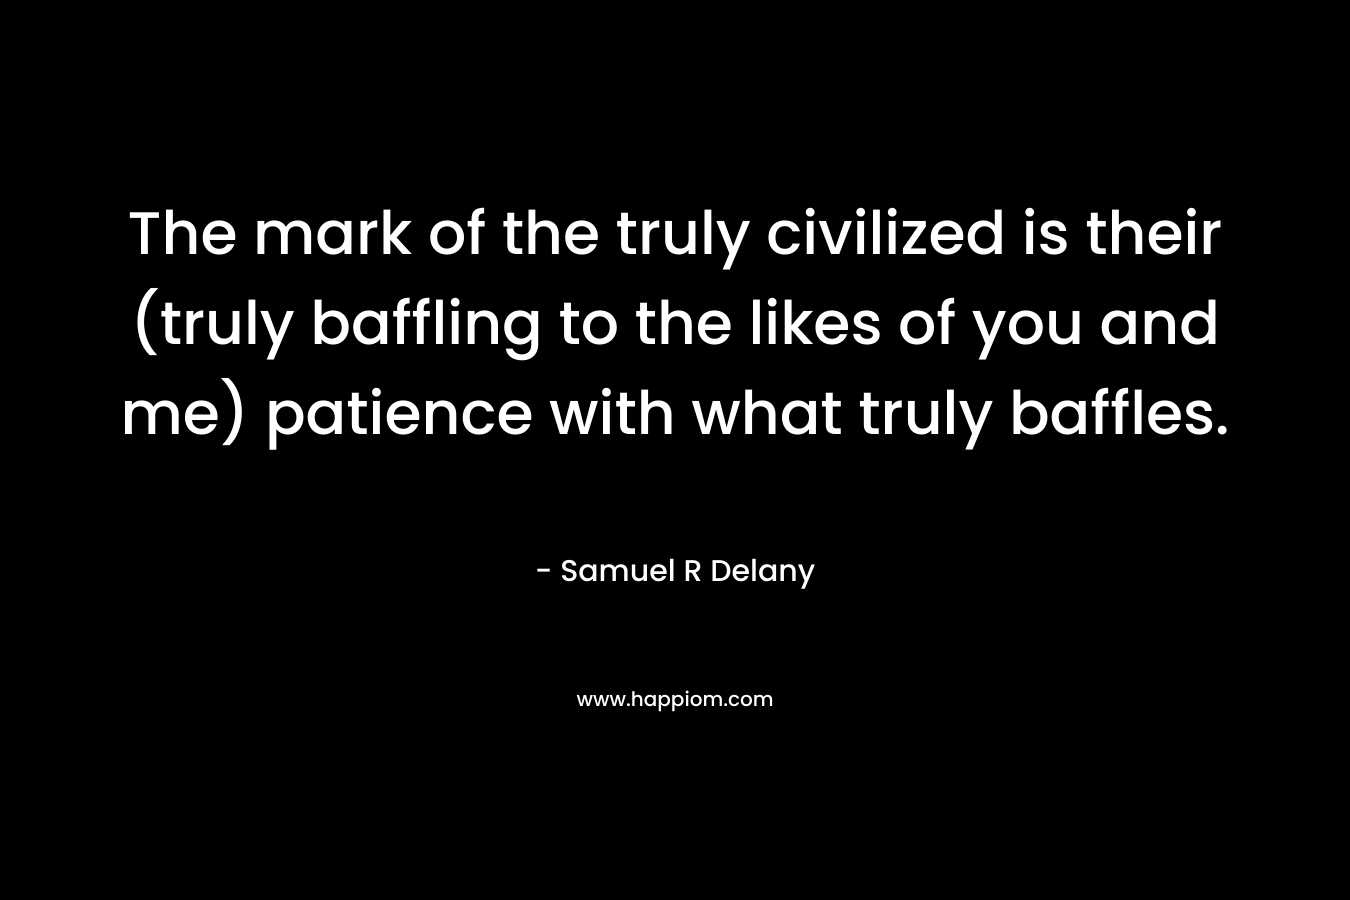 The mark of the truly civilized is their (truly baffling to the likes of you and me) patience with what truly baffles. – Samuel R Delany